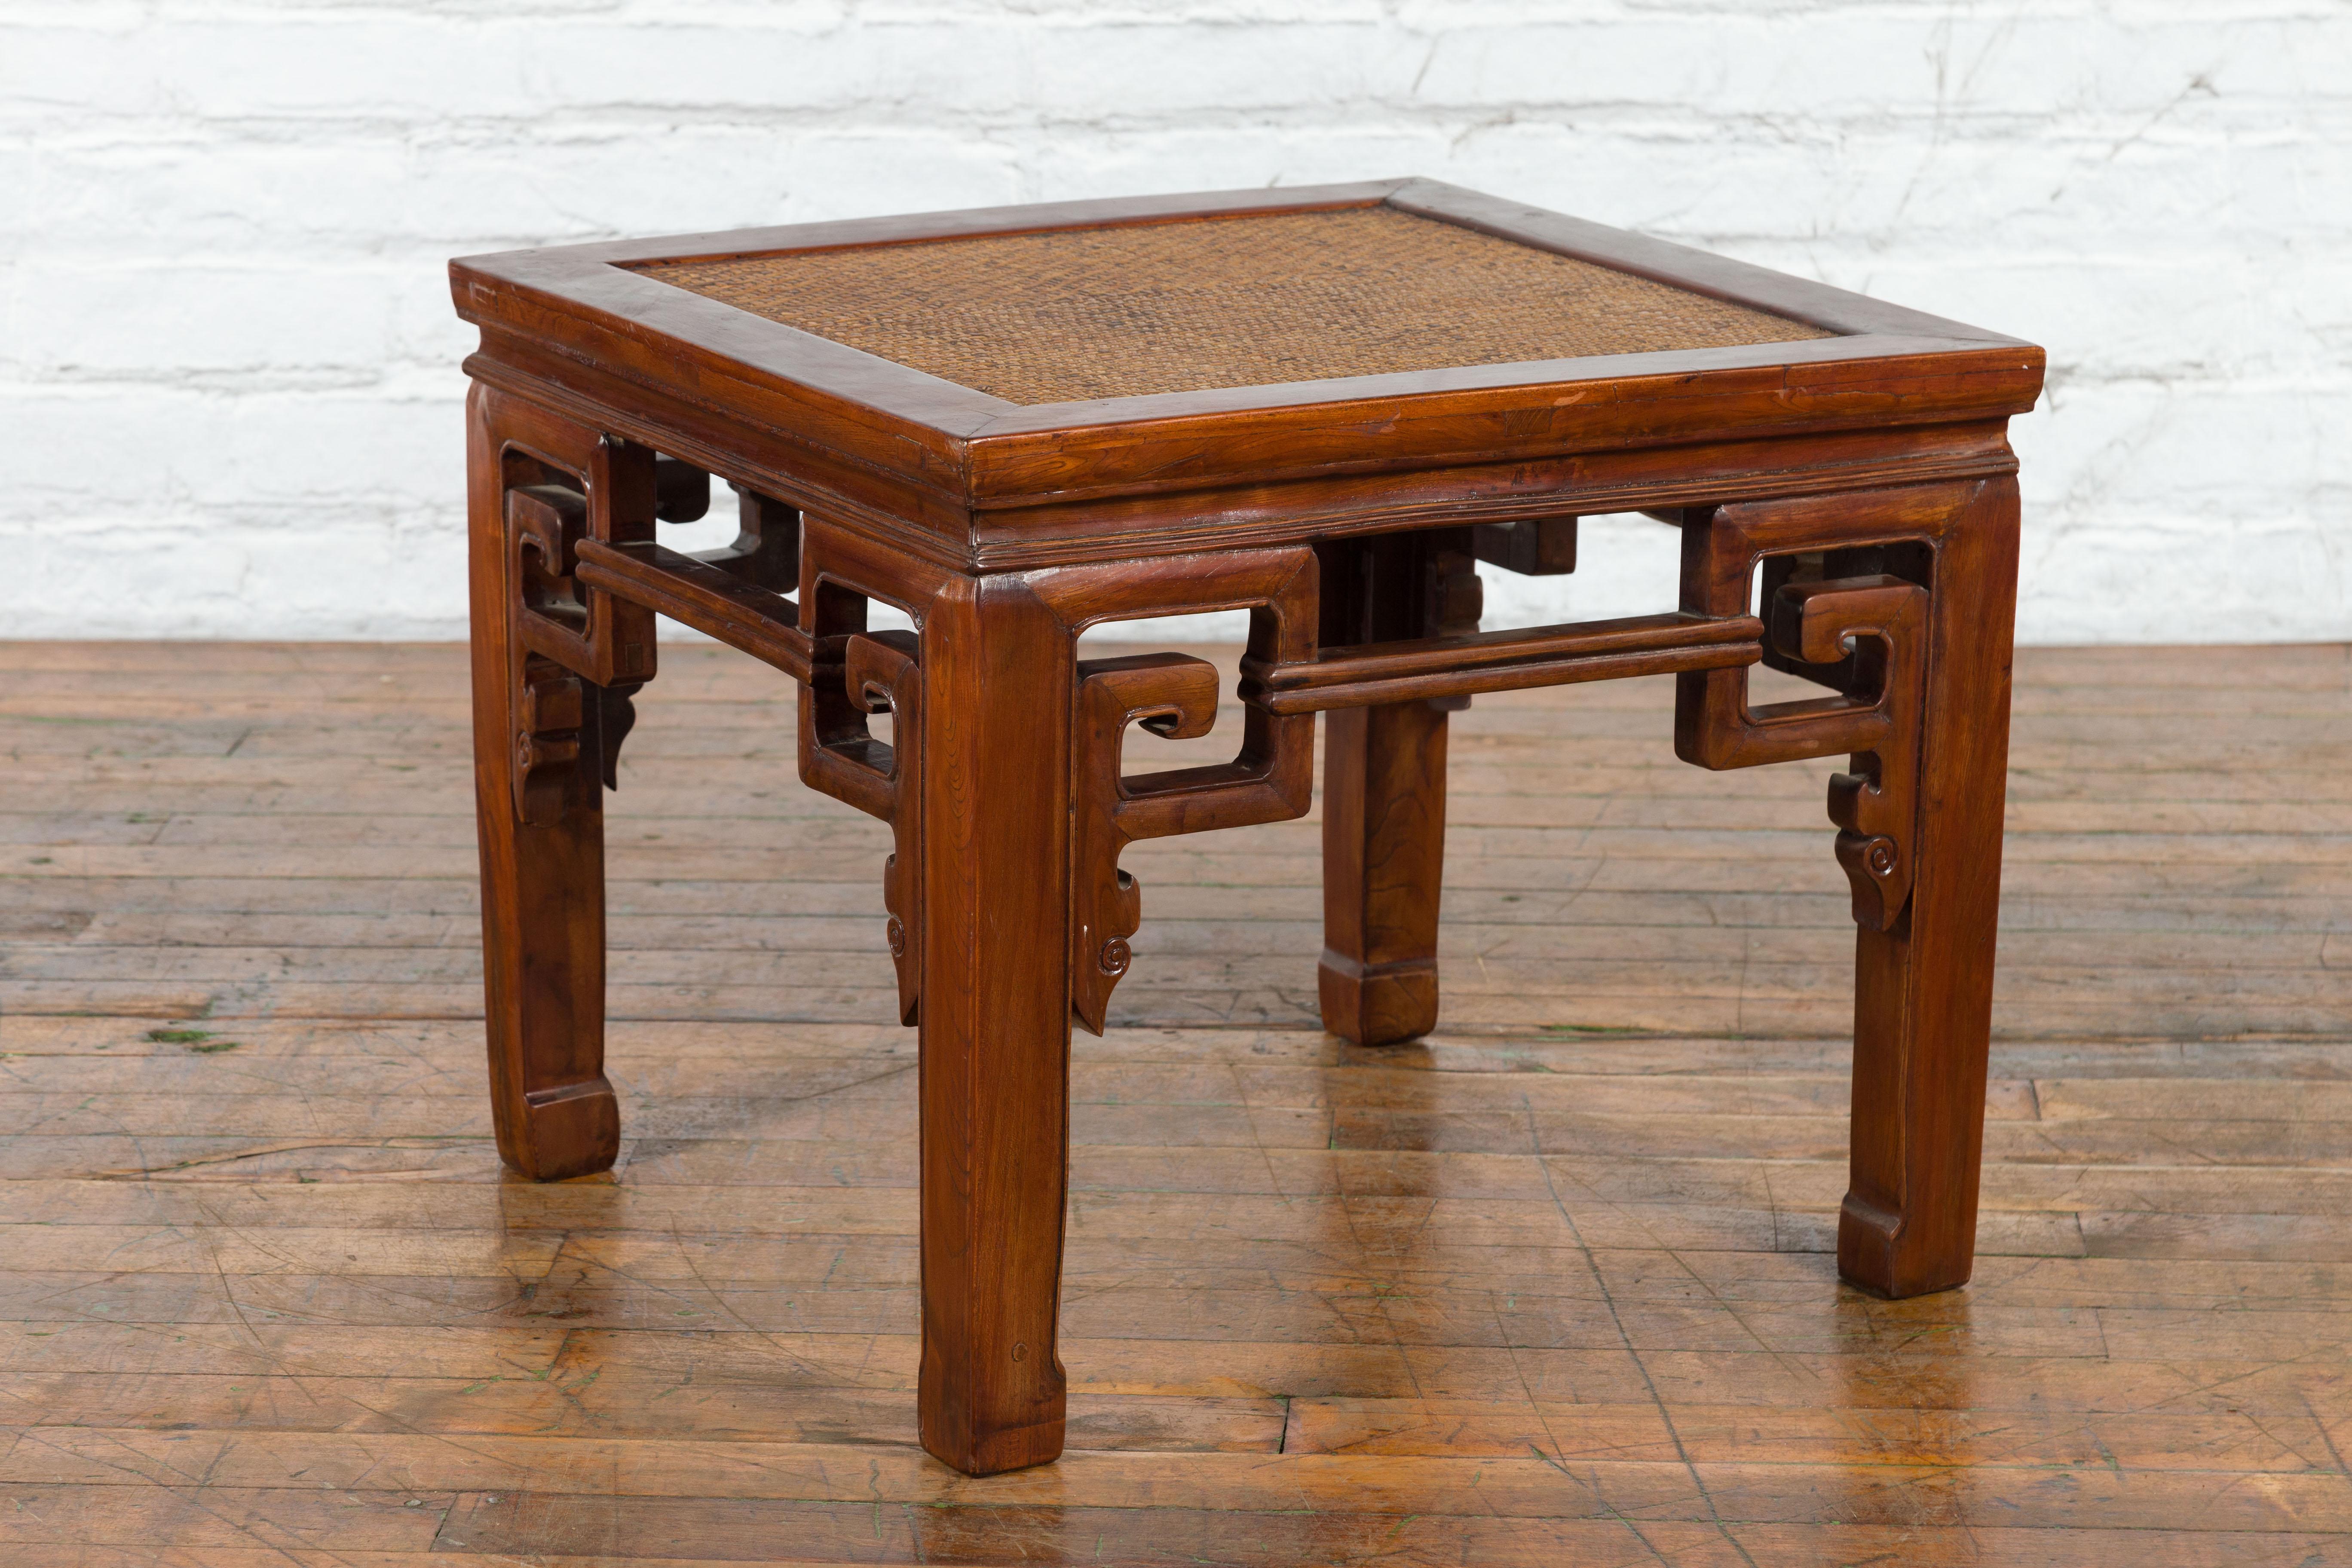 Chinese Qing Dynasty 19th Century Stool or Drinks Table with Woven Rattan Top In Good Condition For Sale In Yonkers, NY